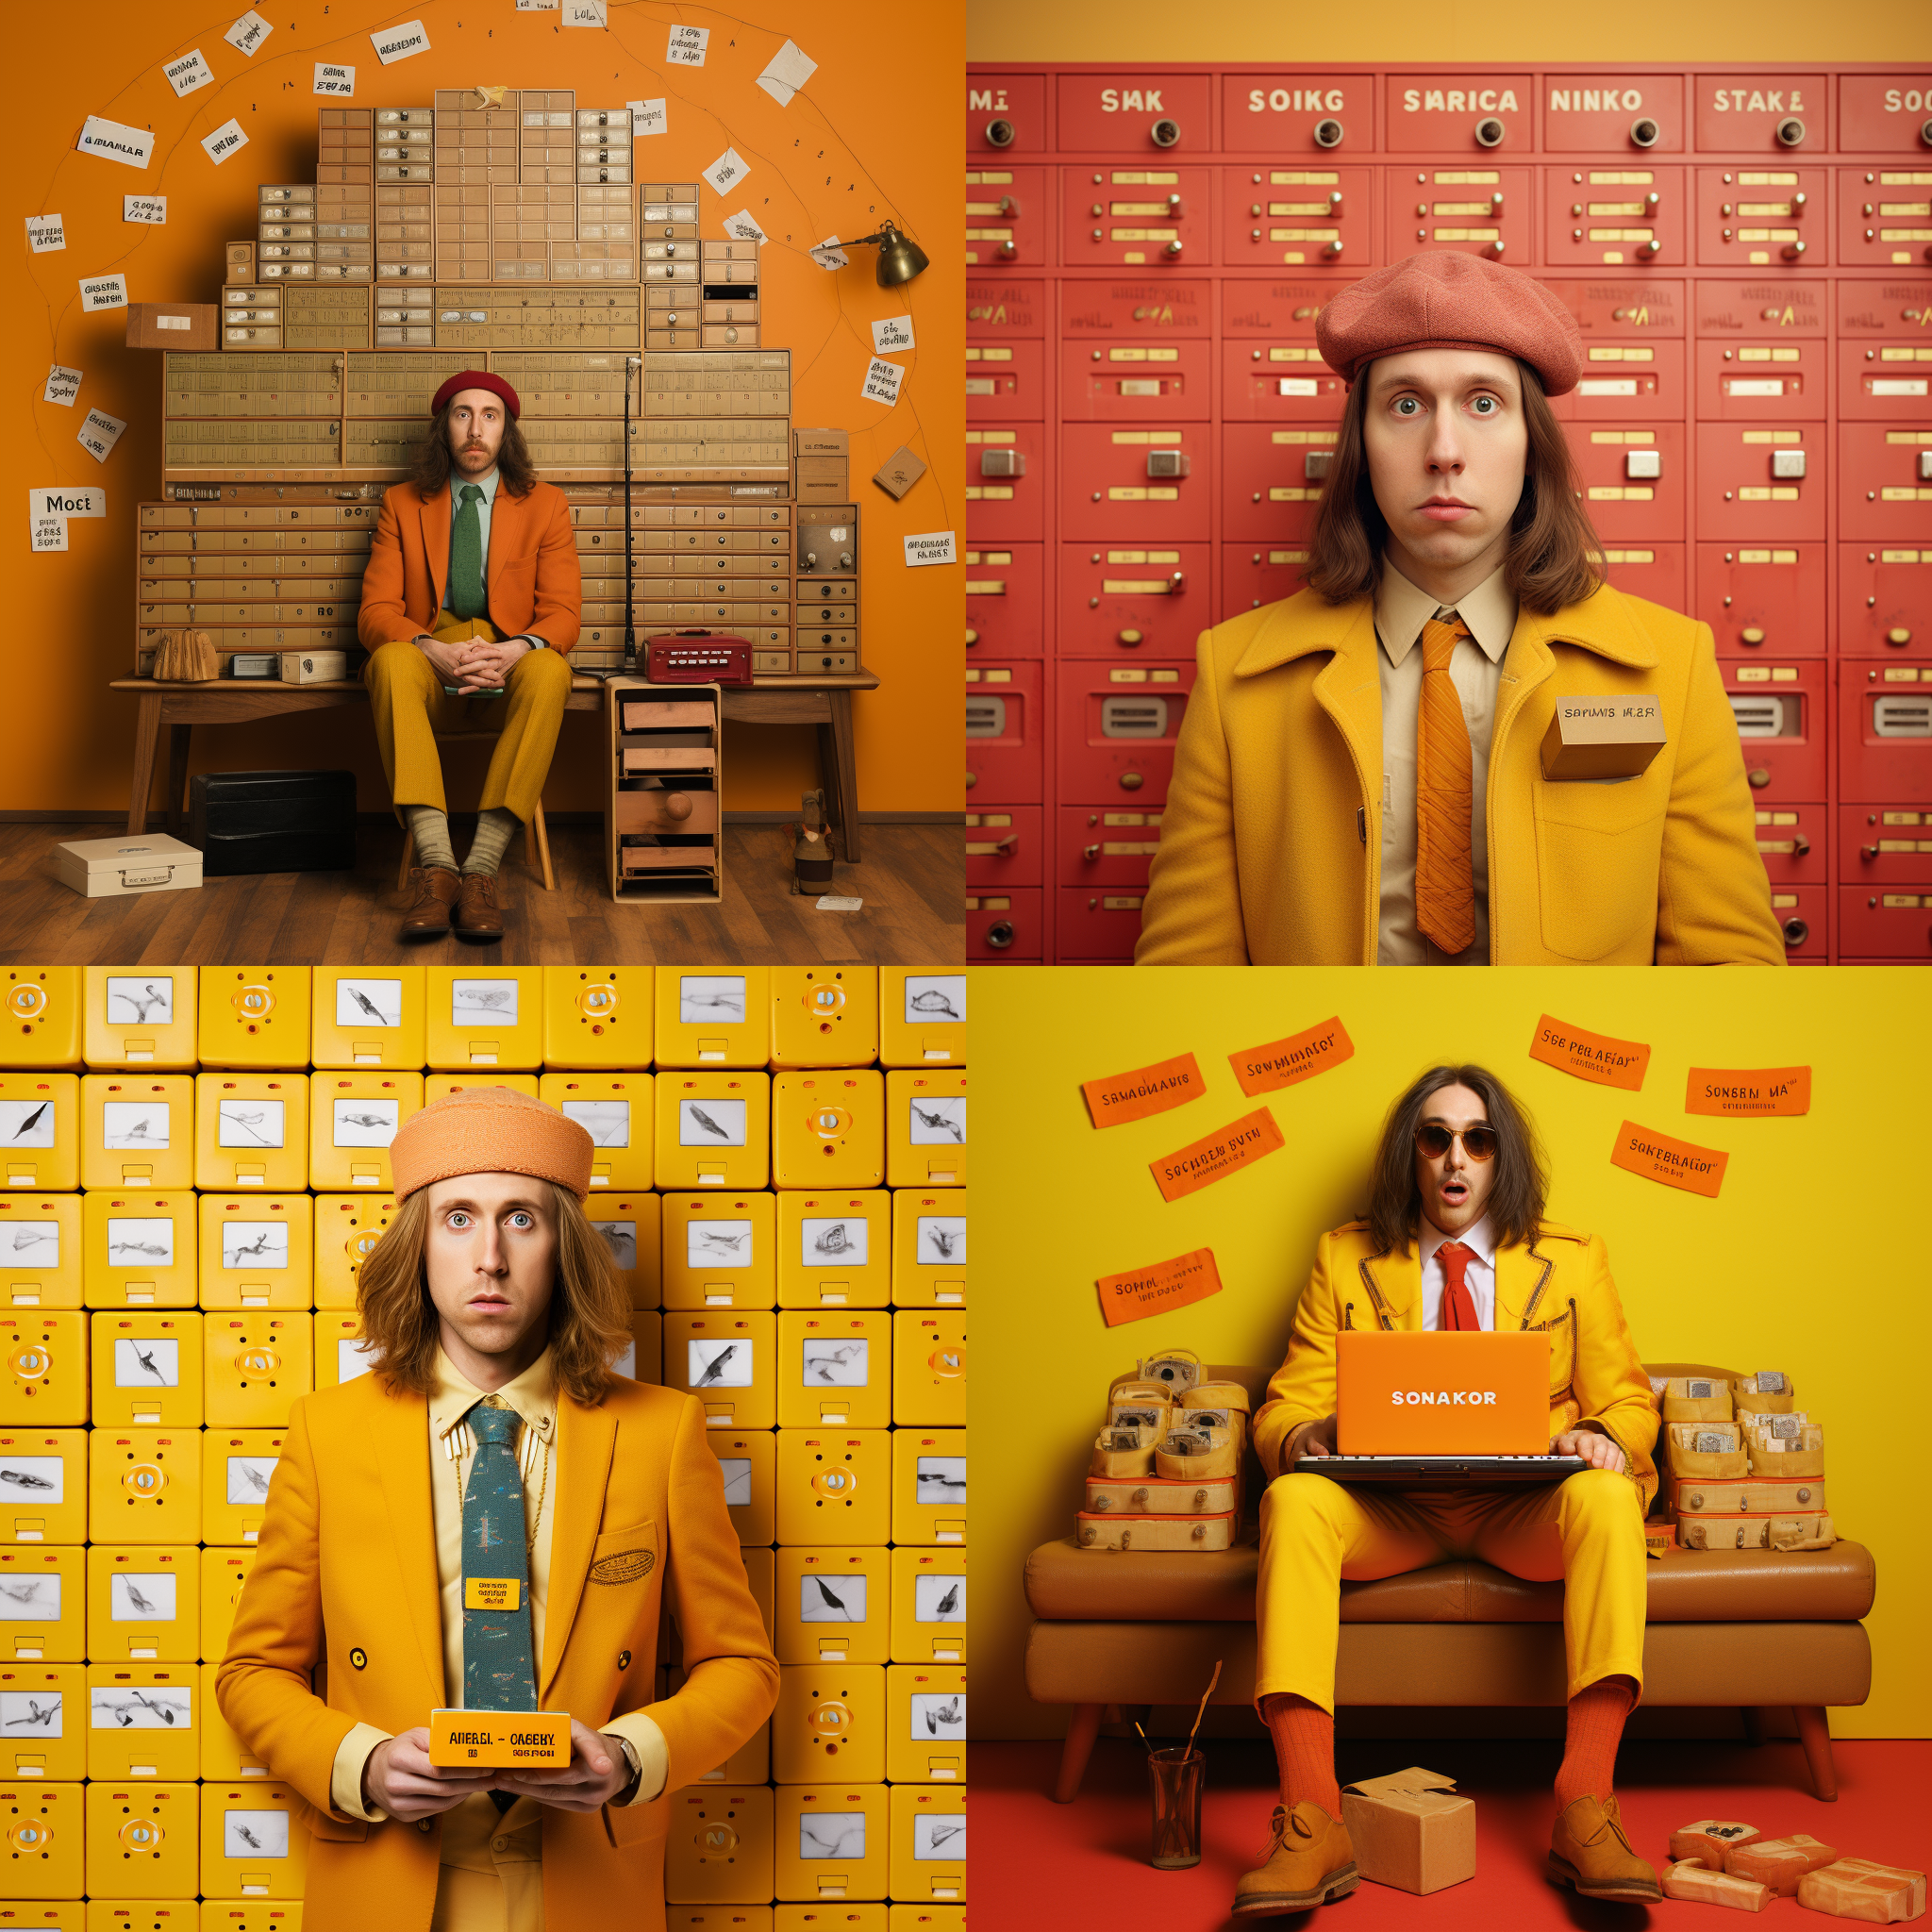 Four, gridded Midjourney AI ith the mages made with the topic Check your spam , the Title Shamrock Your Spam!, and artist Wes Anderson